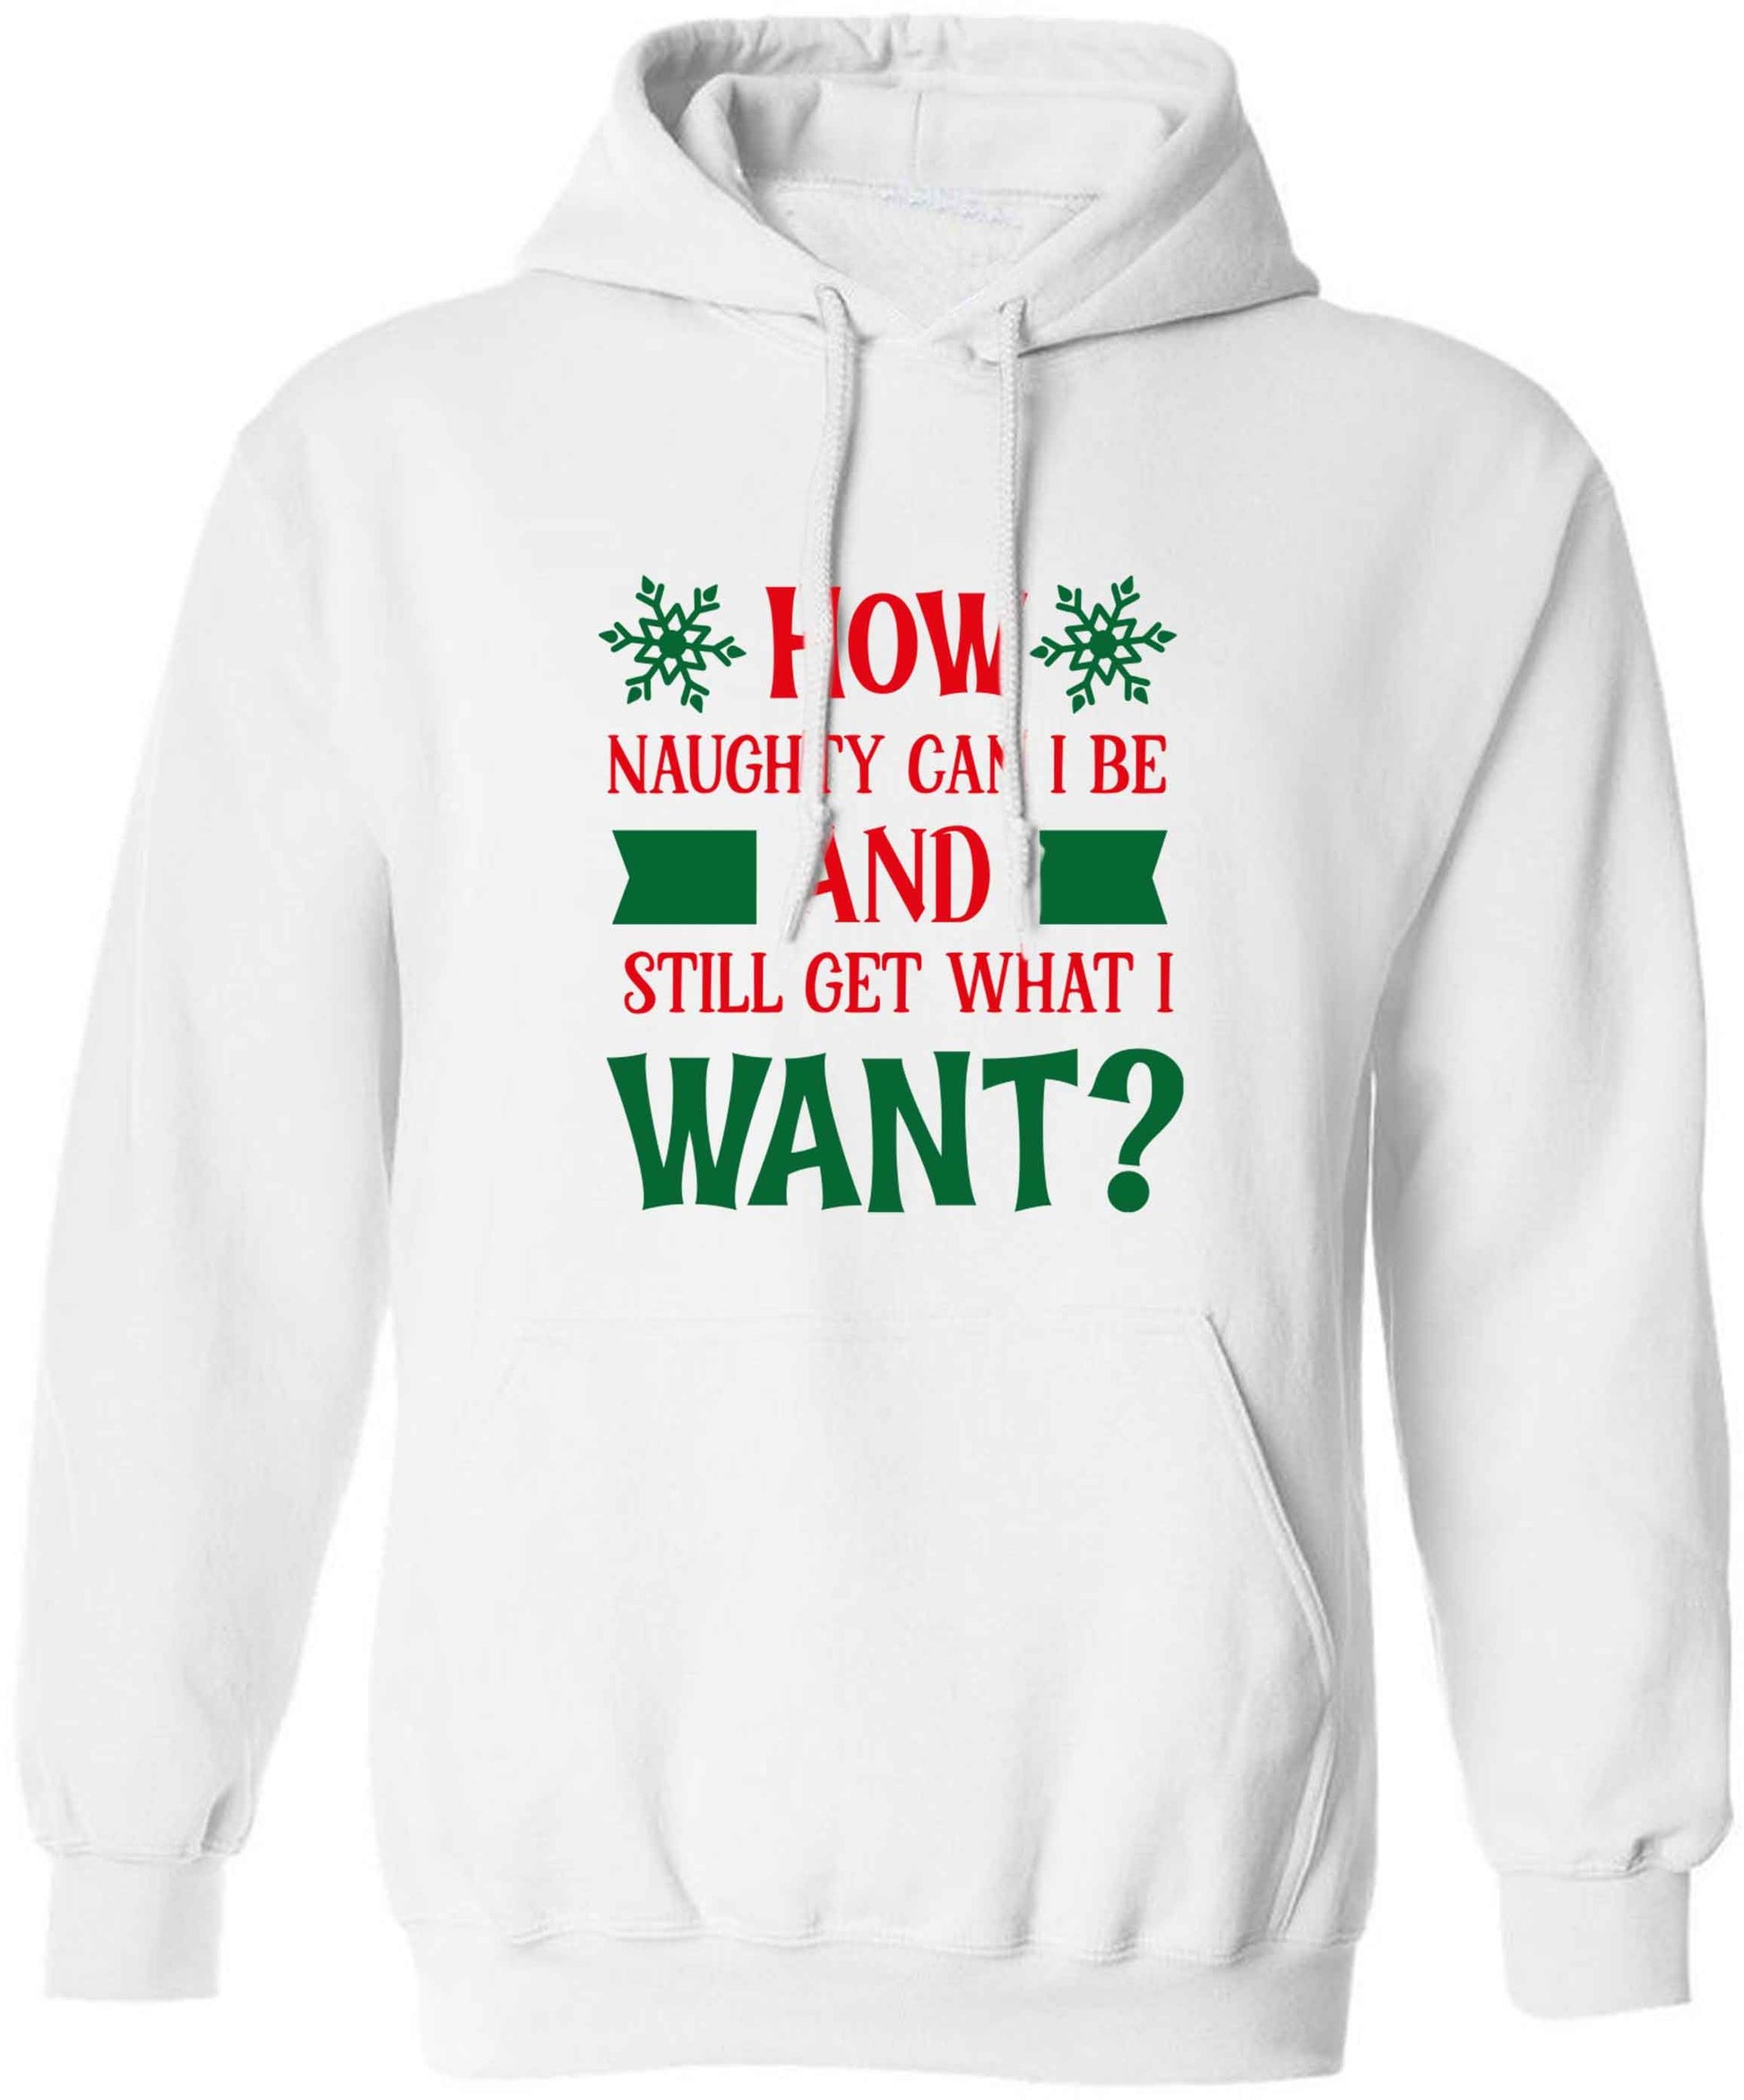 How naughty can I be and still get what I want? adults unisex white hoodie 2XL